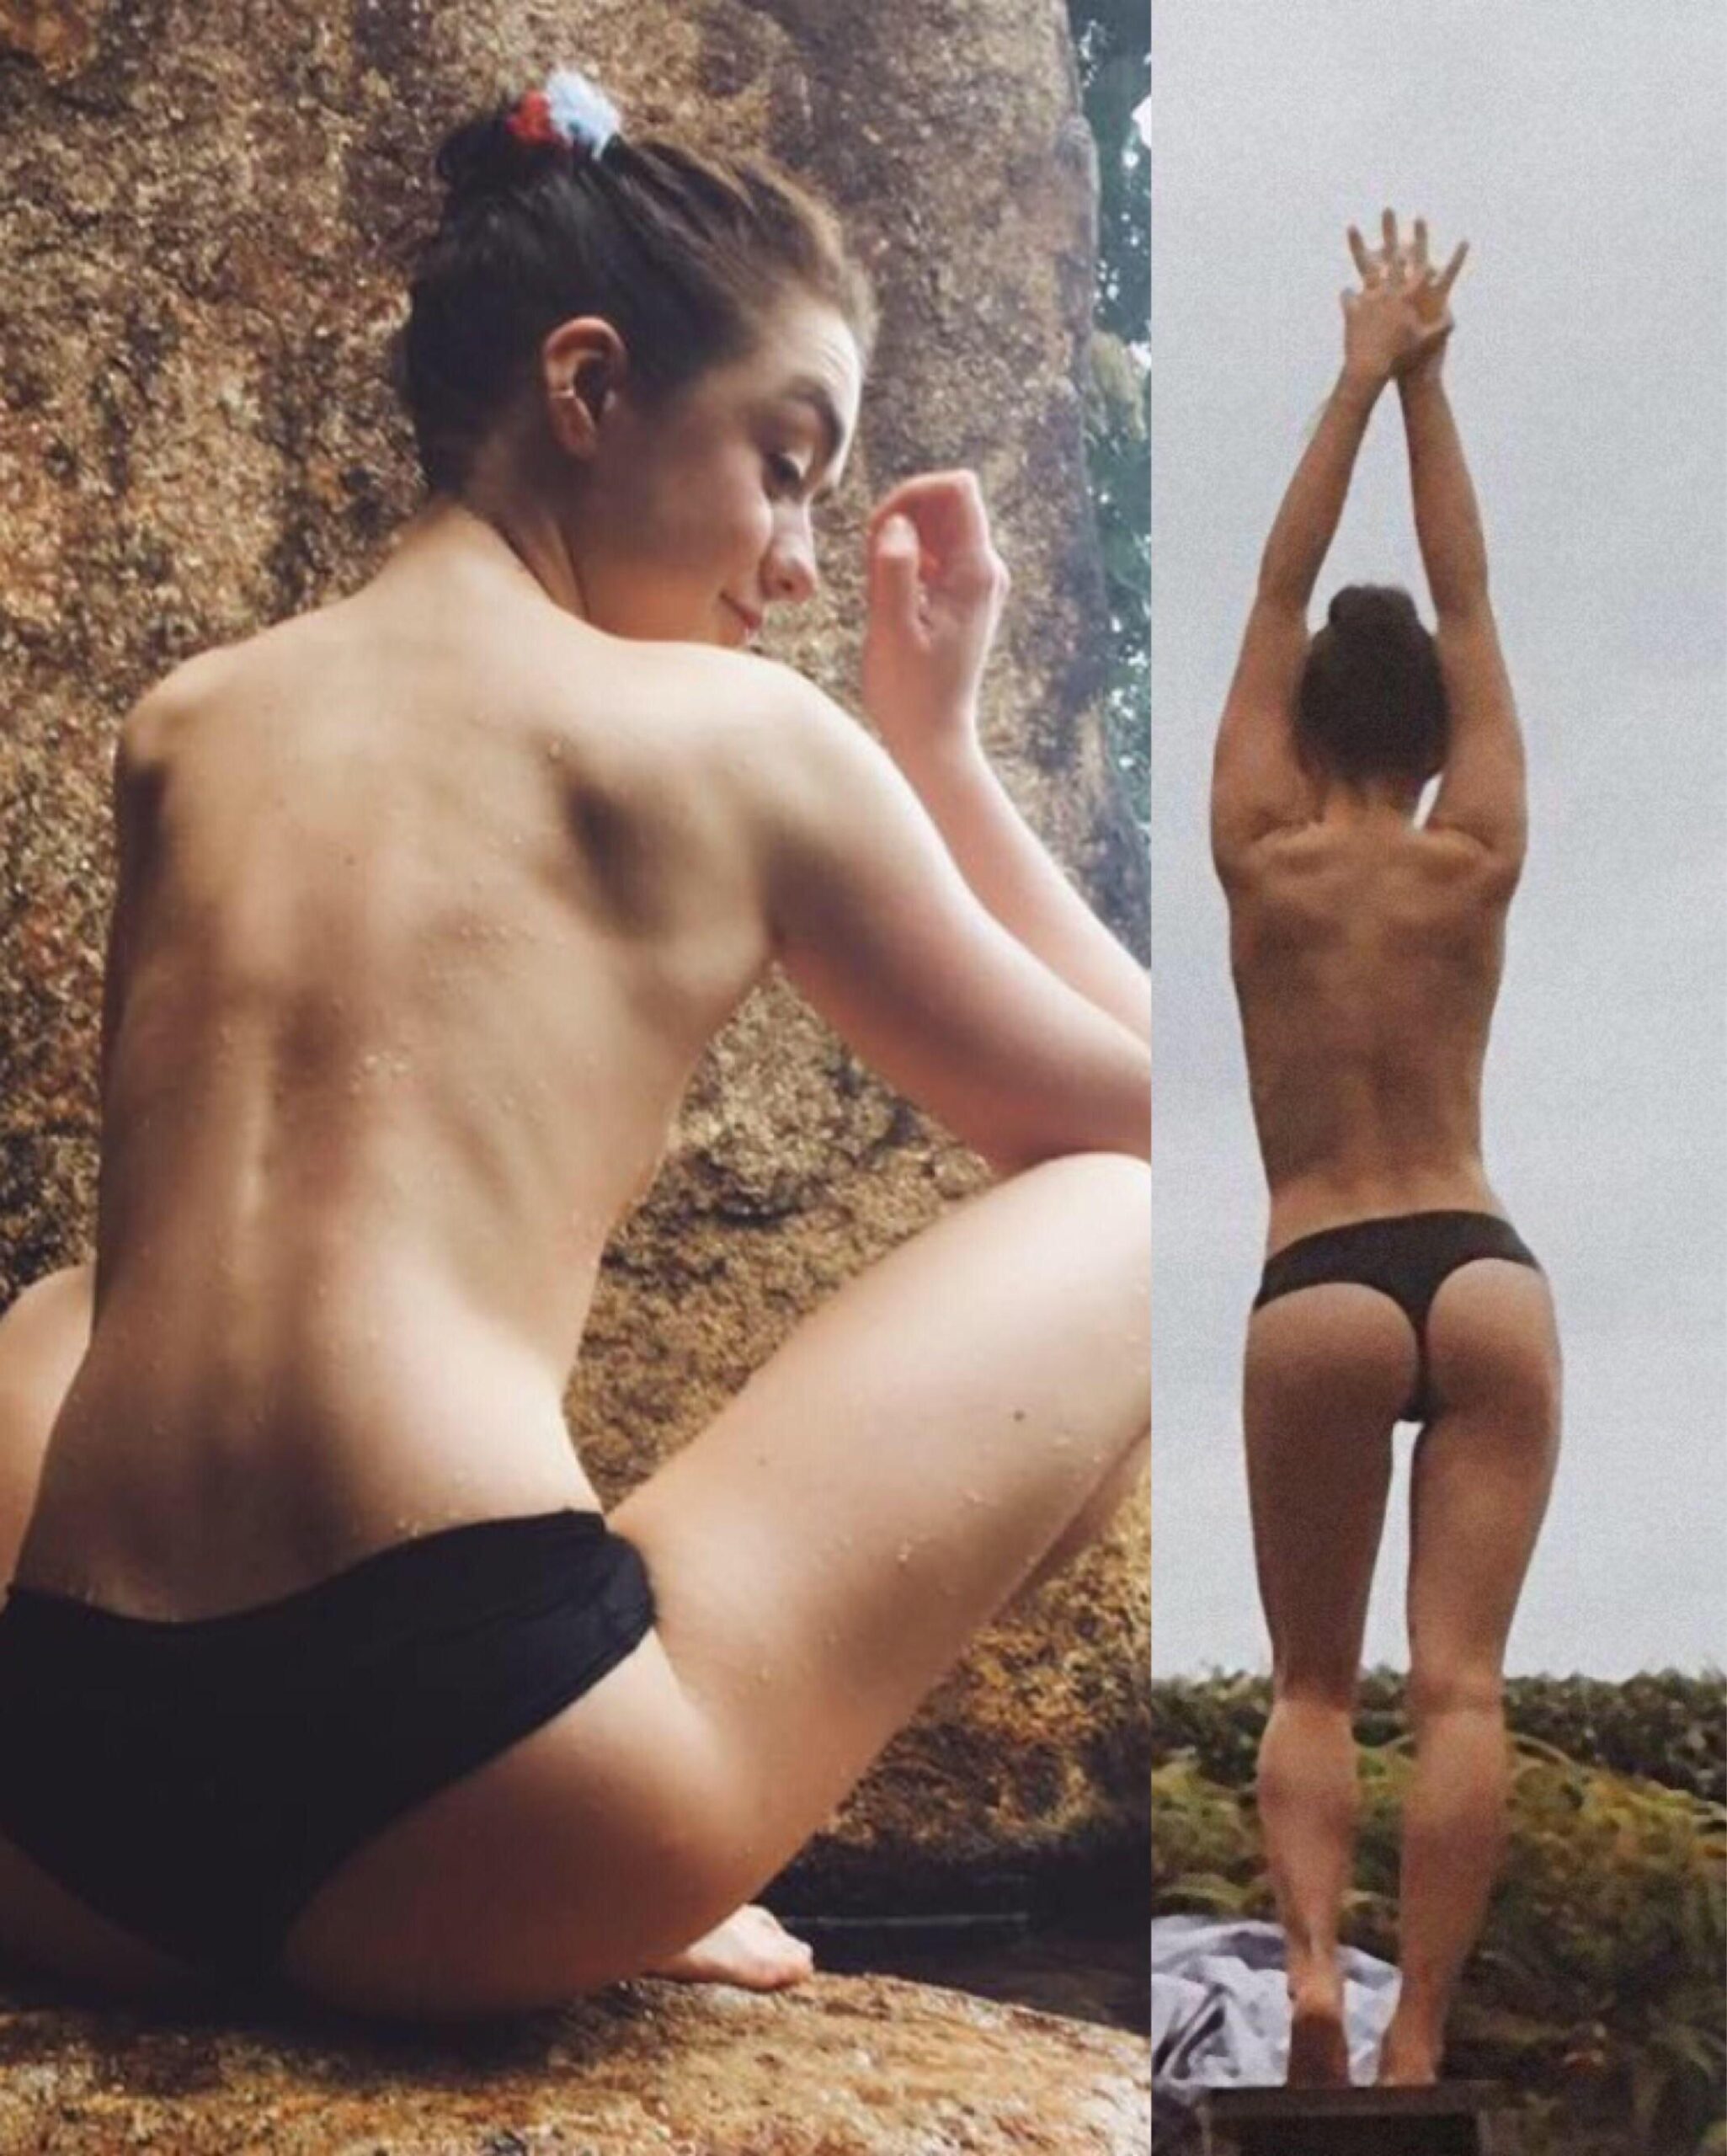 Maisie Williams needs to be bent over.